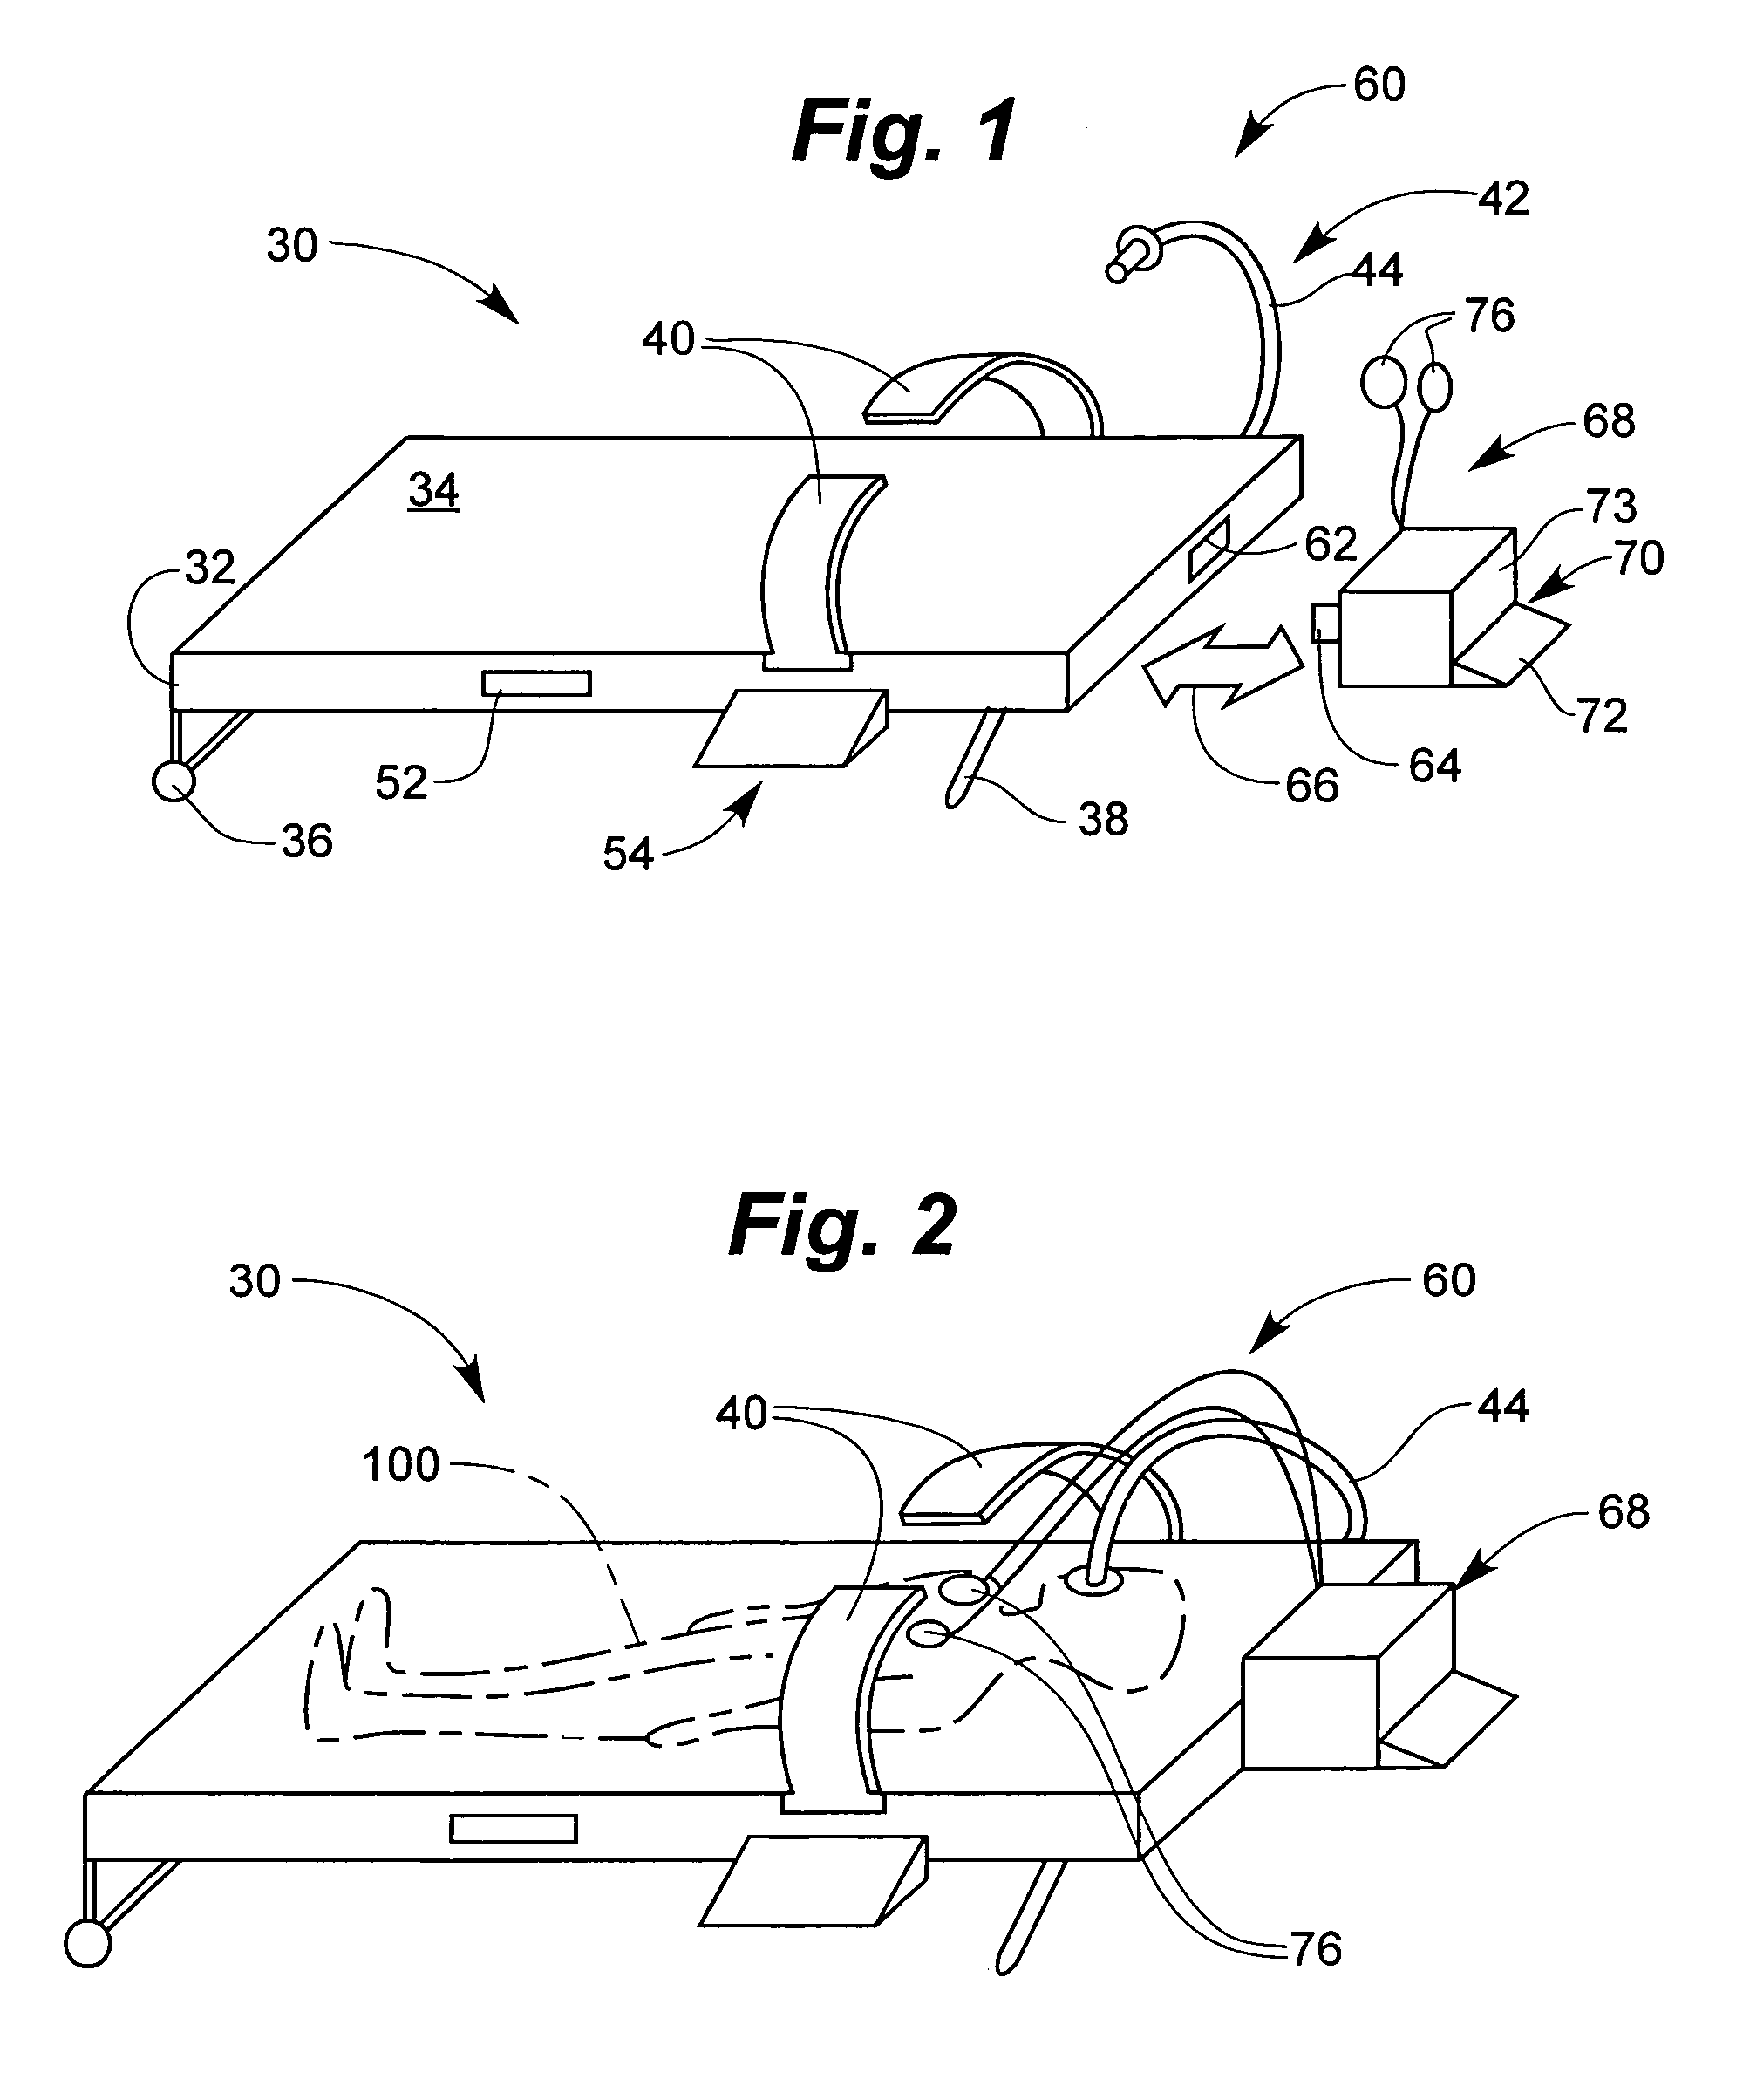 Cooperating defibrillators and external chest compression devices